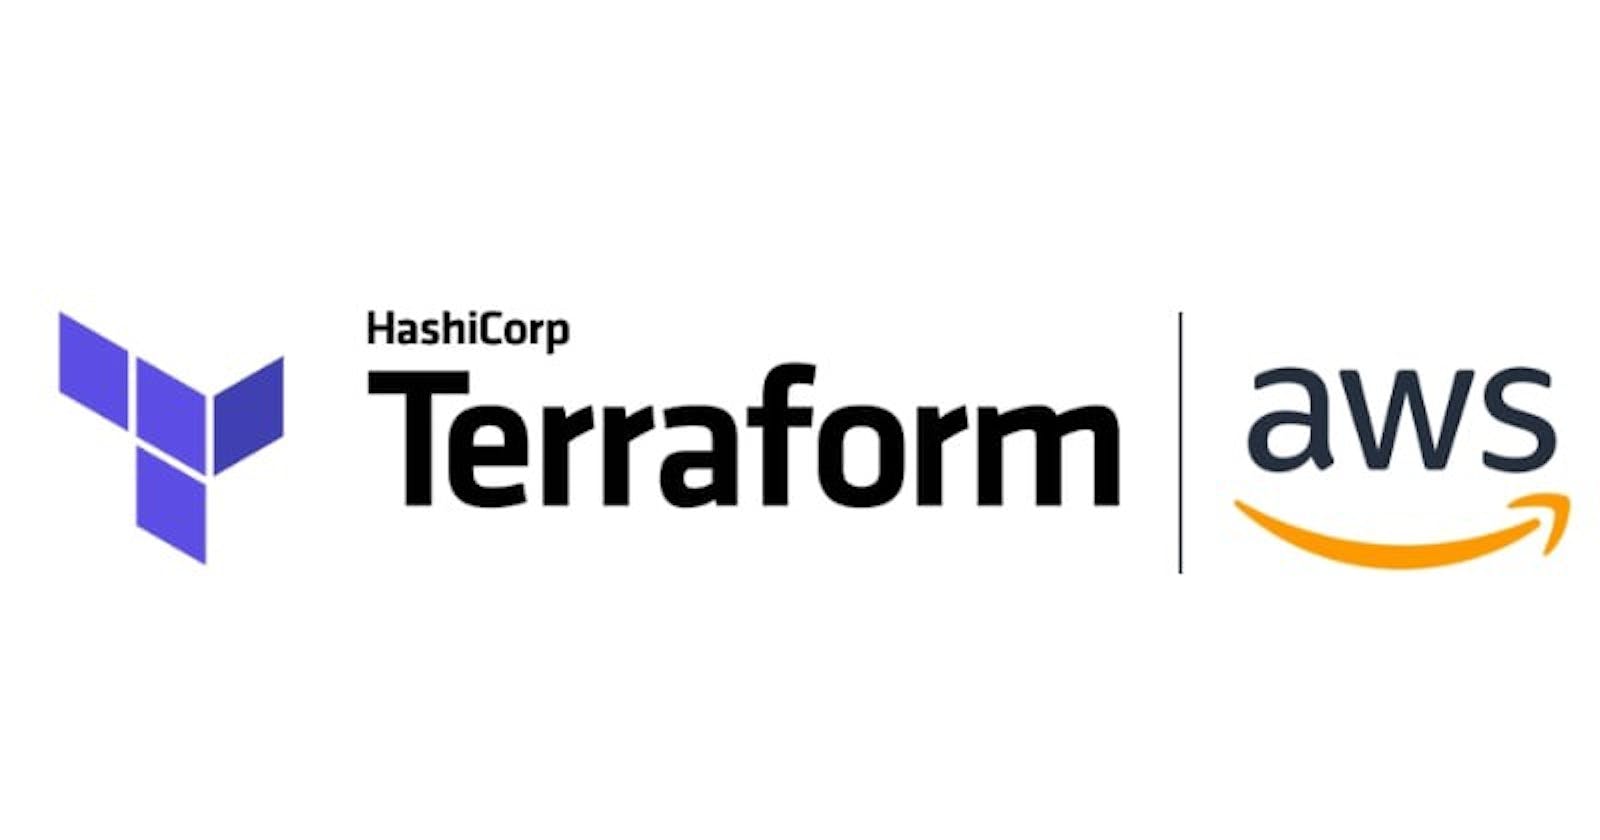 Launch a Static Web Application Infrastructure on AWS using Terraform